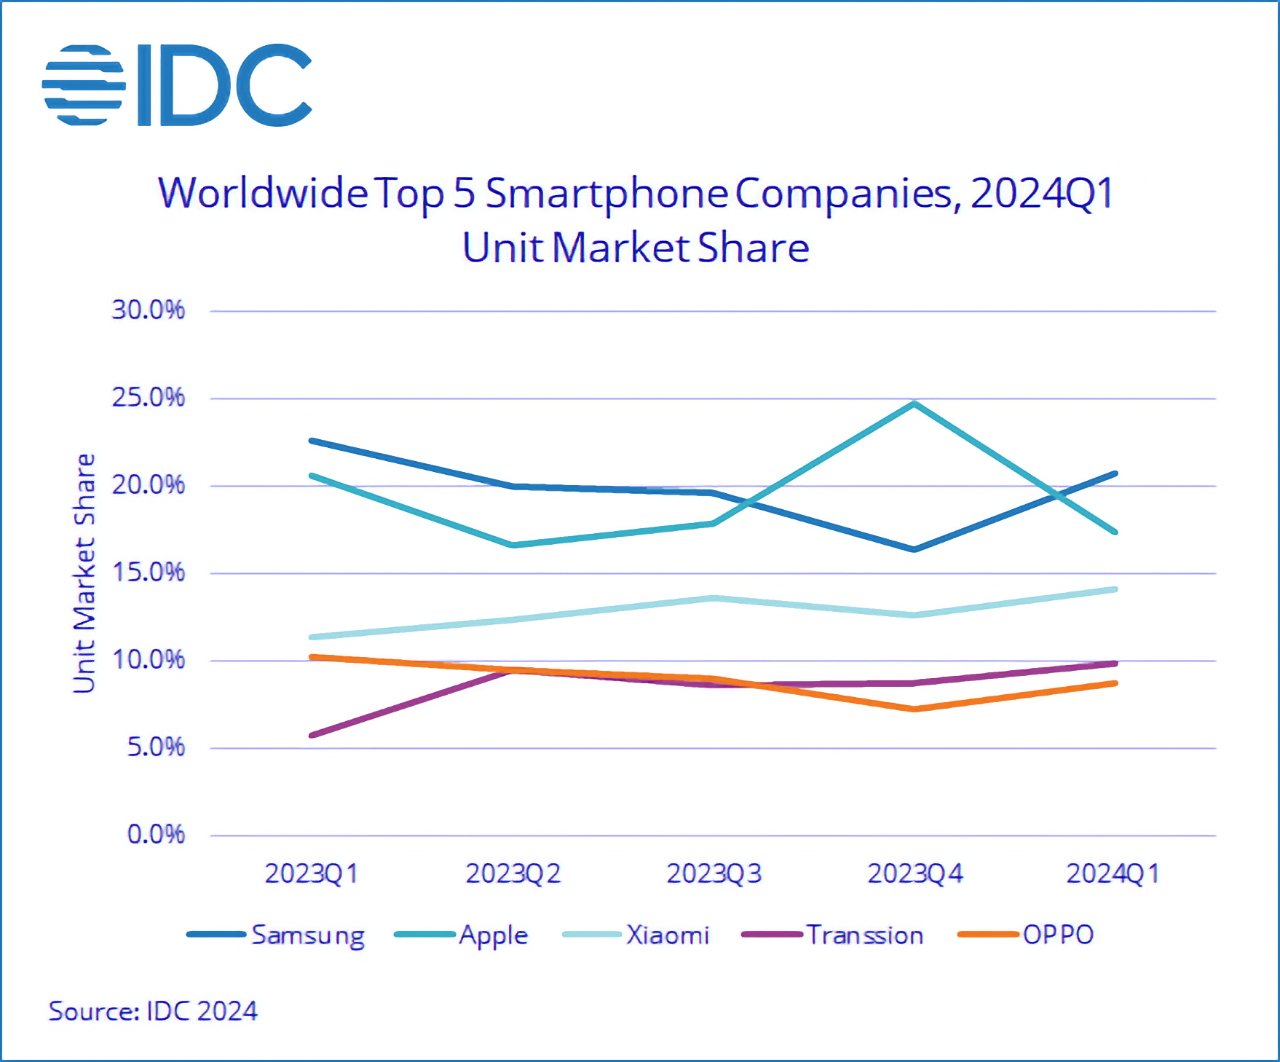 Bar graph showing market share trends for Samsung, Apple, Xiaomi, Transsion, and OPPO among top 5 smartphone companies in 2024 Q1. Source: IDC 2024.